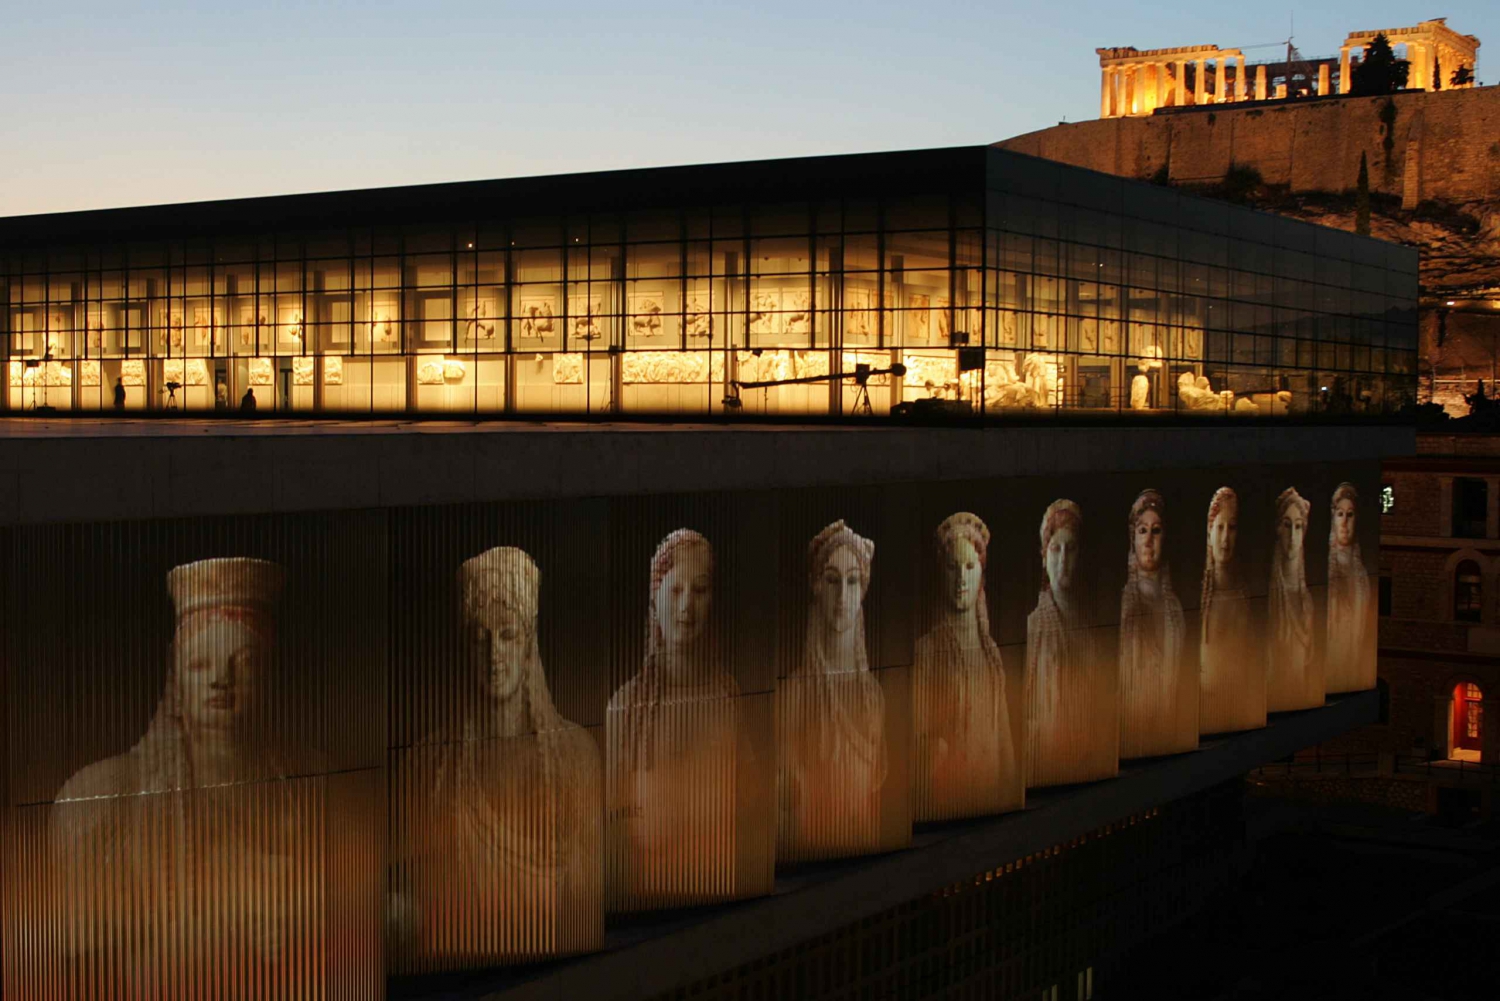 Athens: Friday Night Acropolis Museum Visit with Dinner